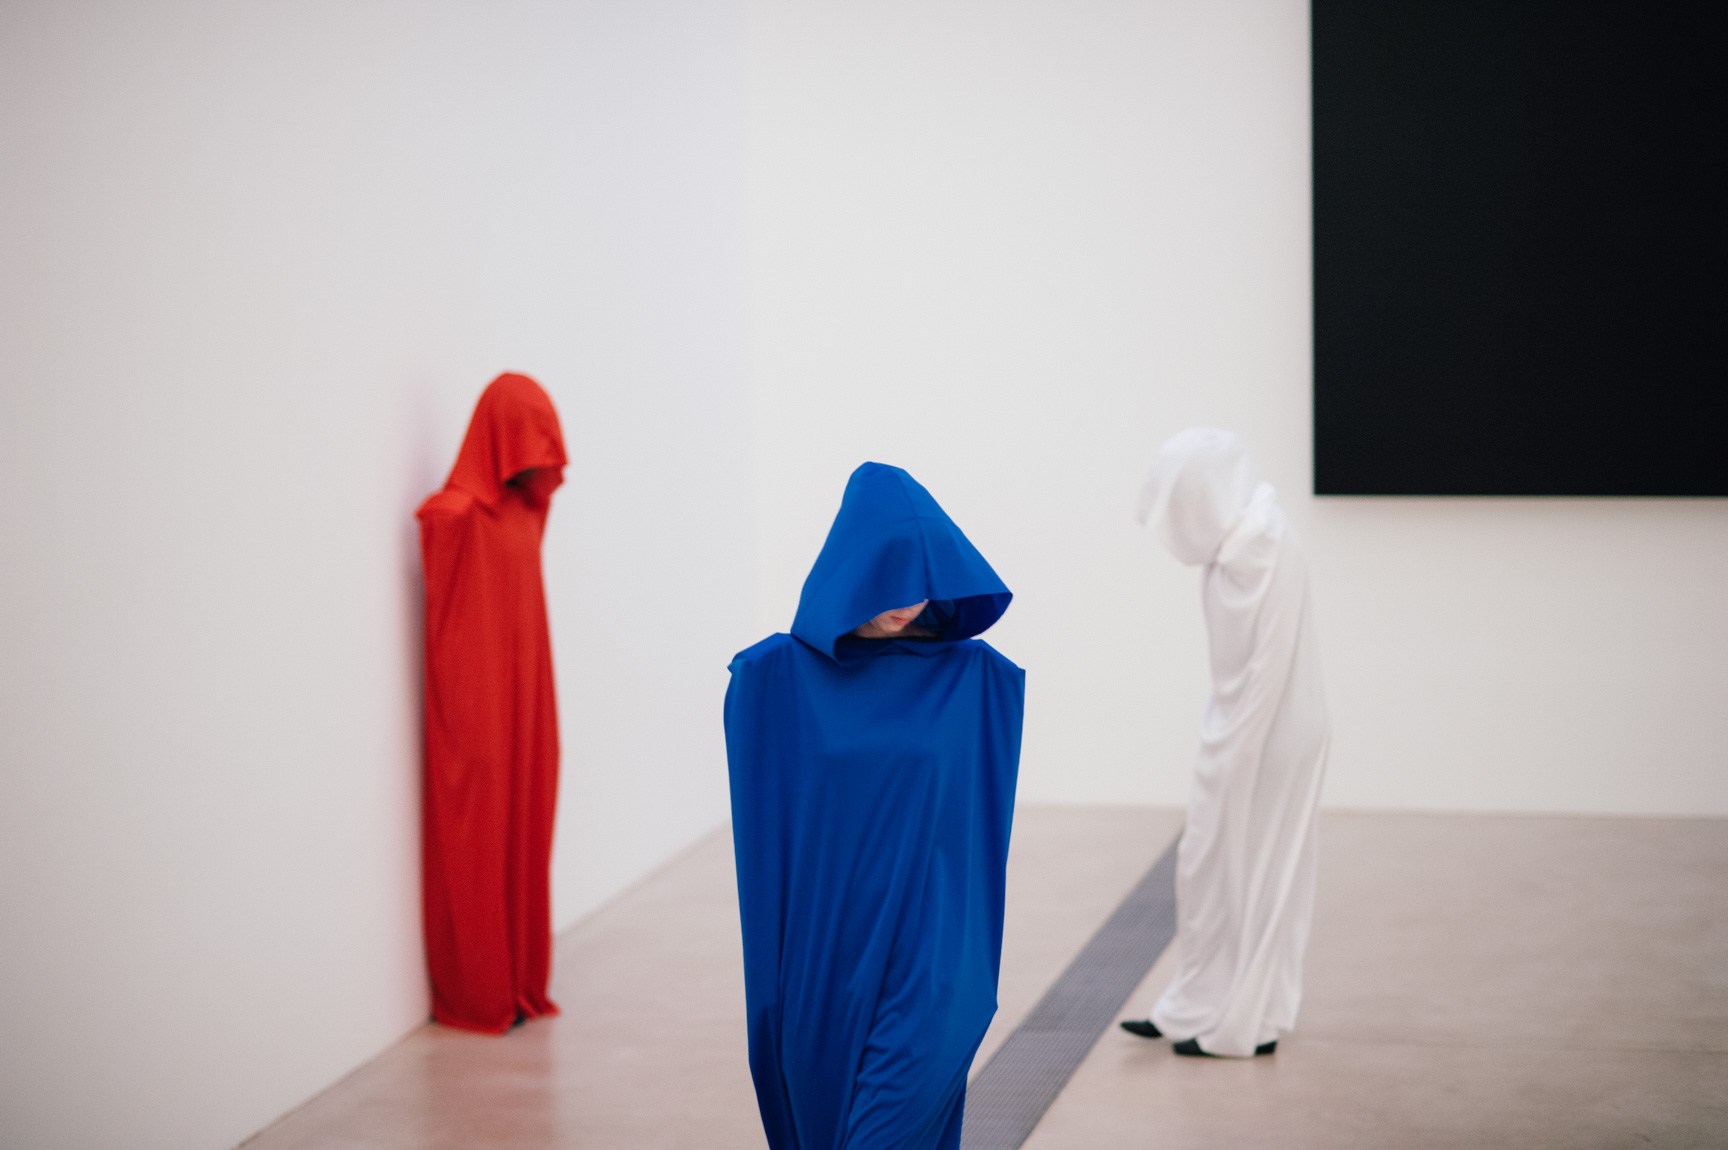 Three students perform wearing white, red, and blue hooded robes in front of Ellsworth Kelly's "Blue Black."